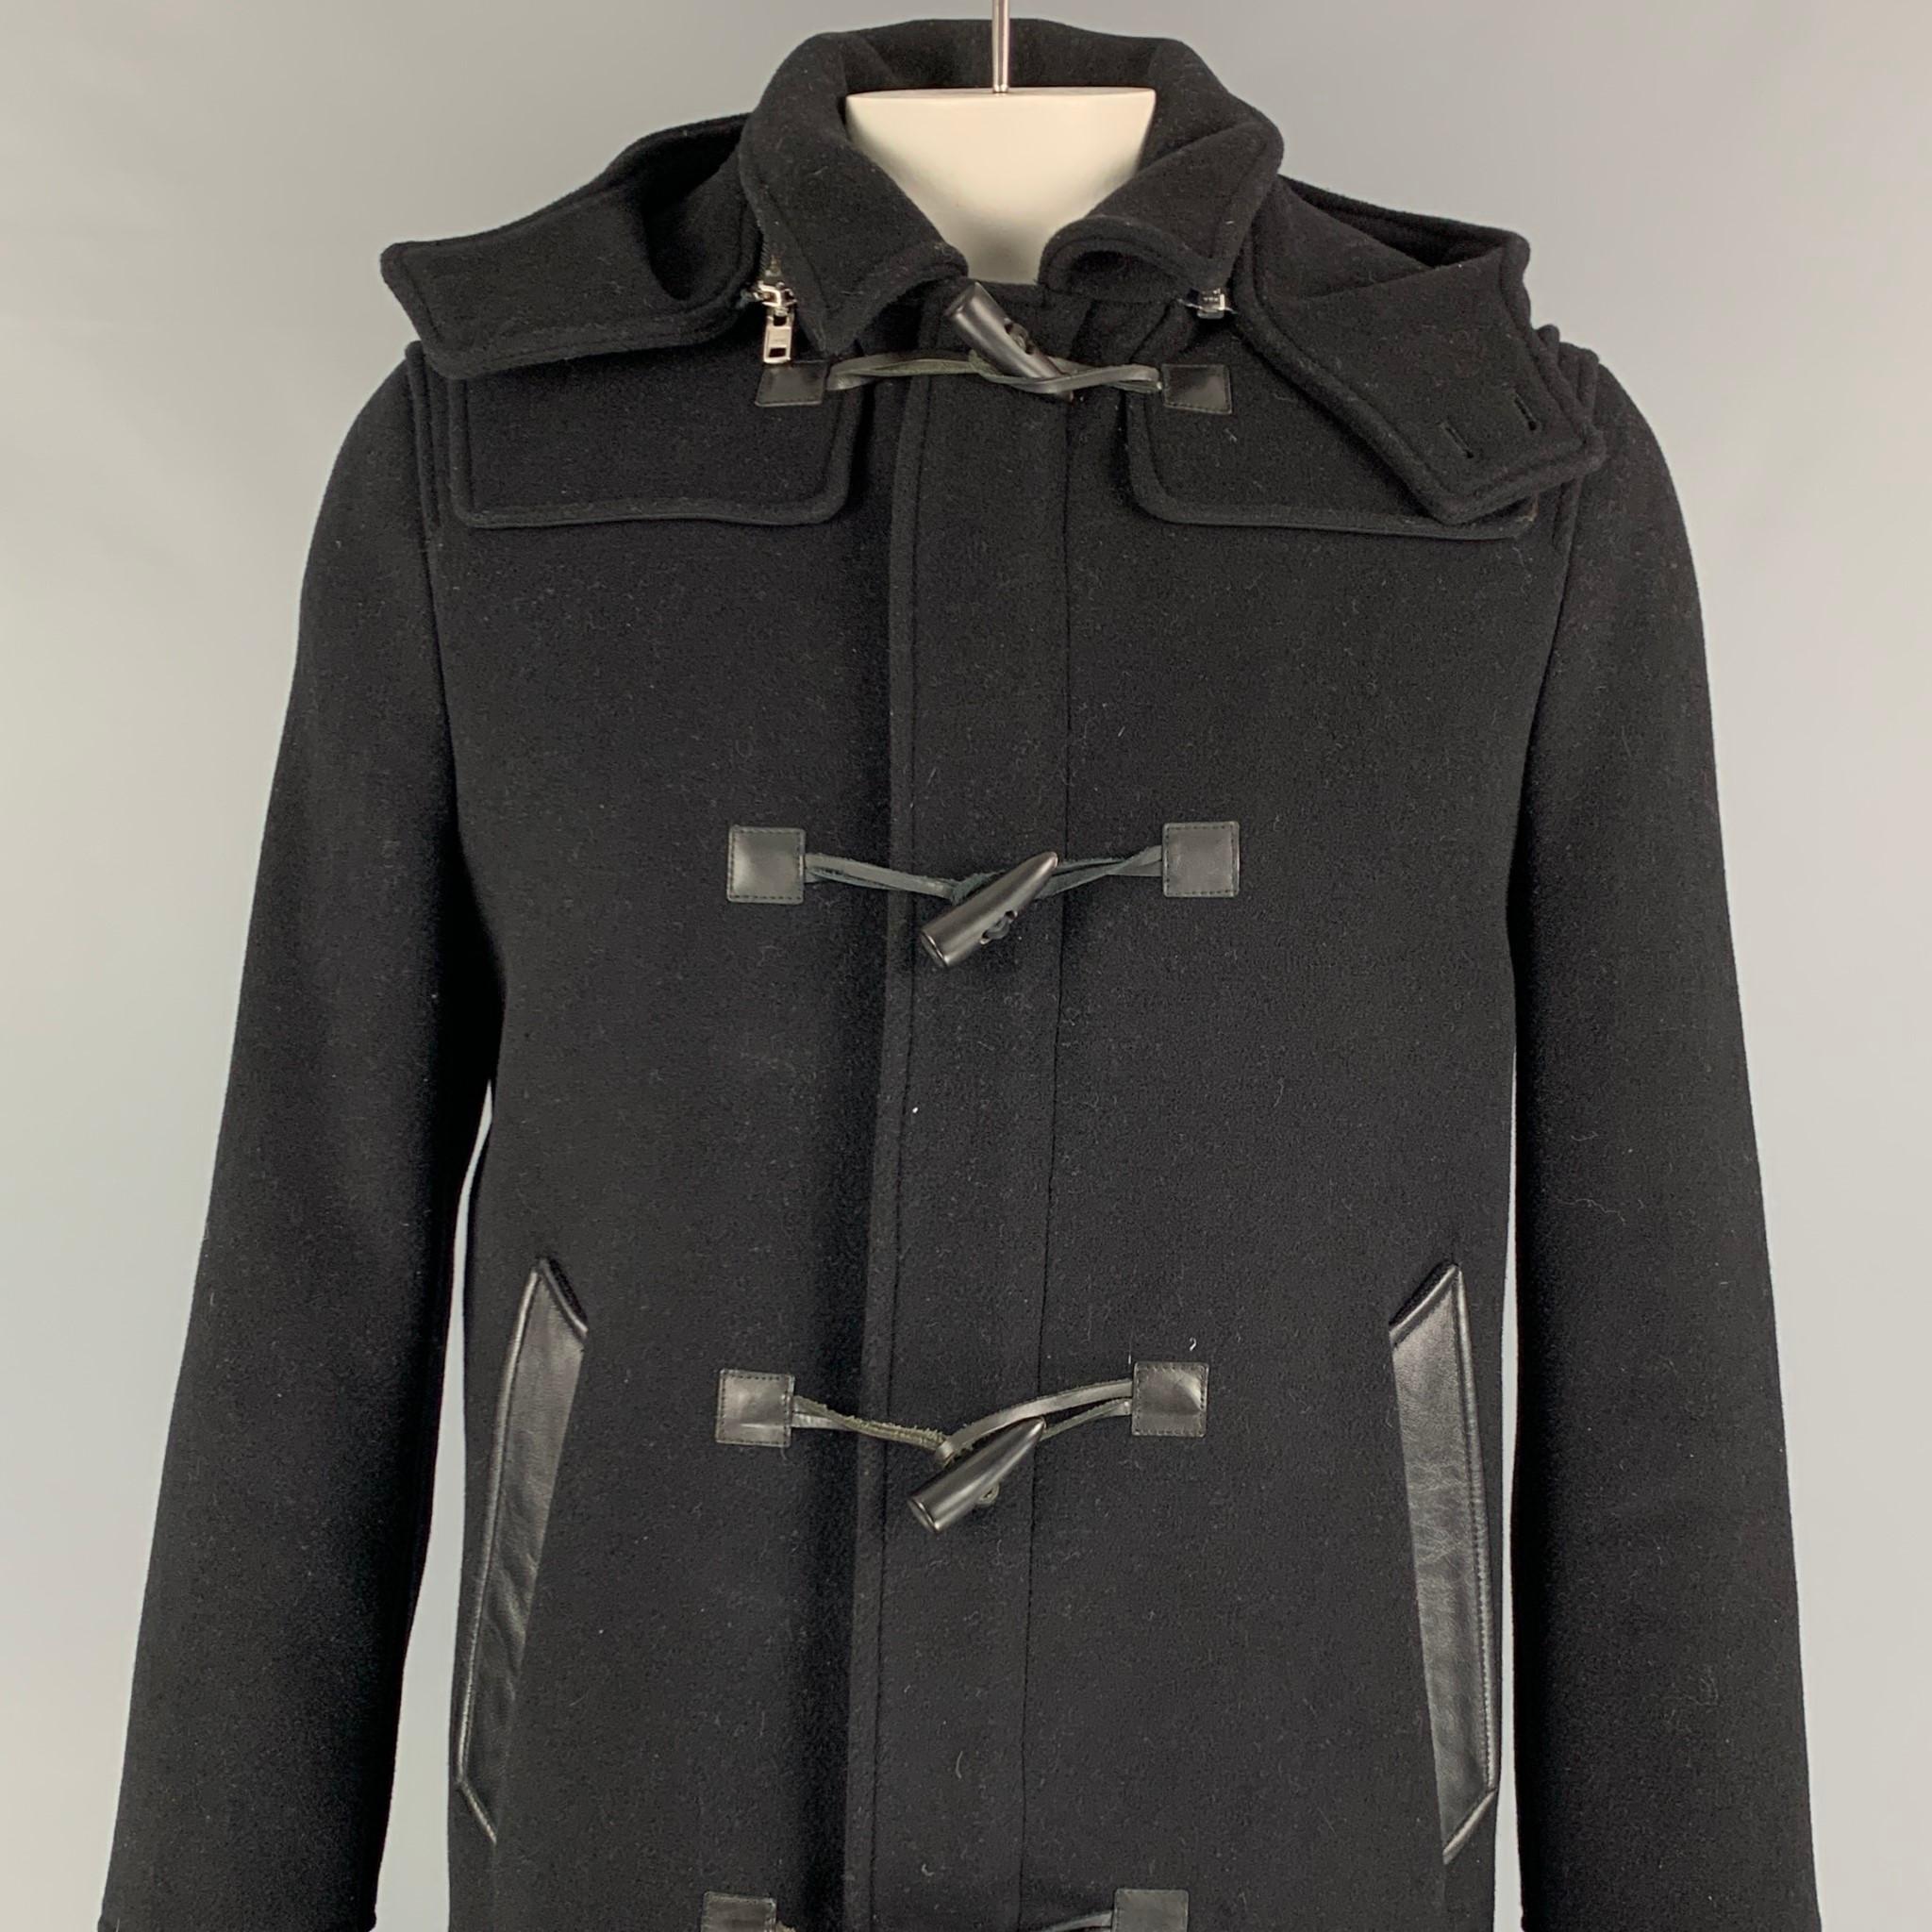 THE KOOPLES coat comes in a black wool with a full quilted liner featuring a removable hood, spread collar, leather trim, slit pockets, single back vent, and a toggle button closure. 

Very Good Pre-Owned Condition.
Marked: